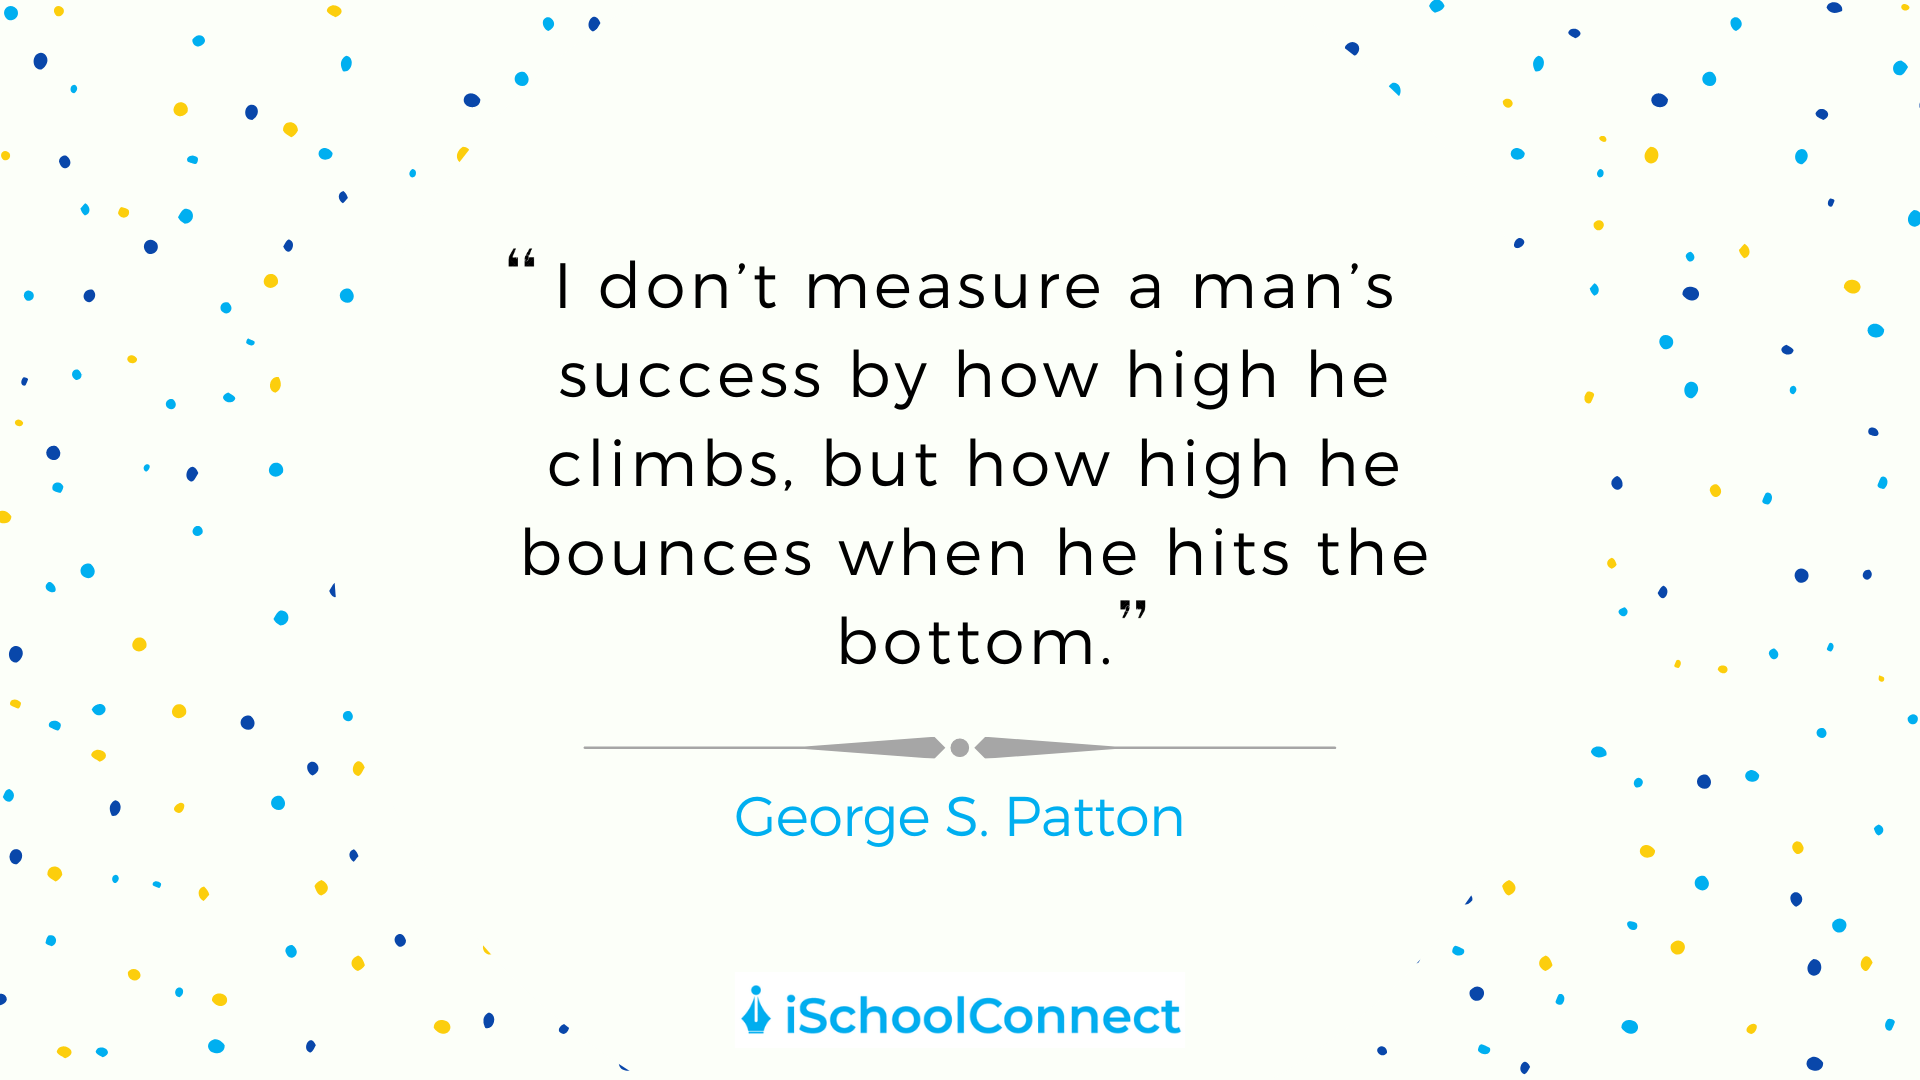 I don't measure a man's success by how high he climbs, but how high he bounces when he hits the bottom. - George S. Patton